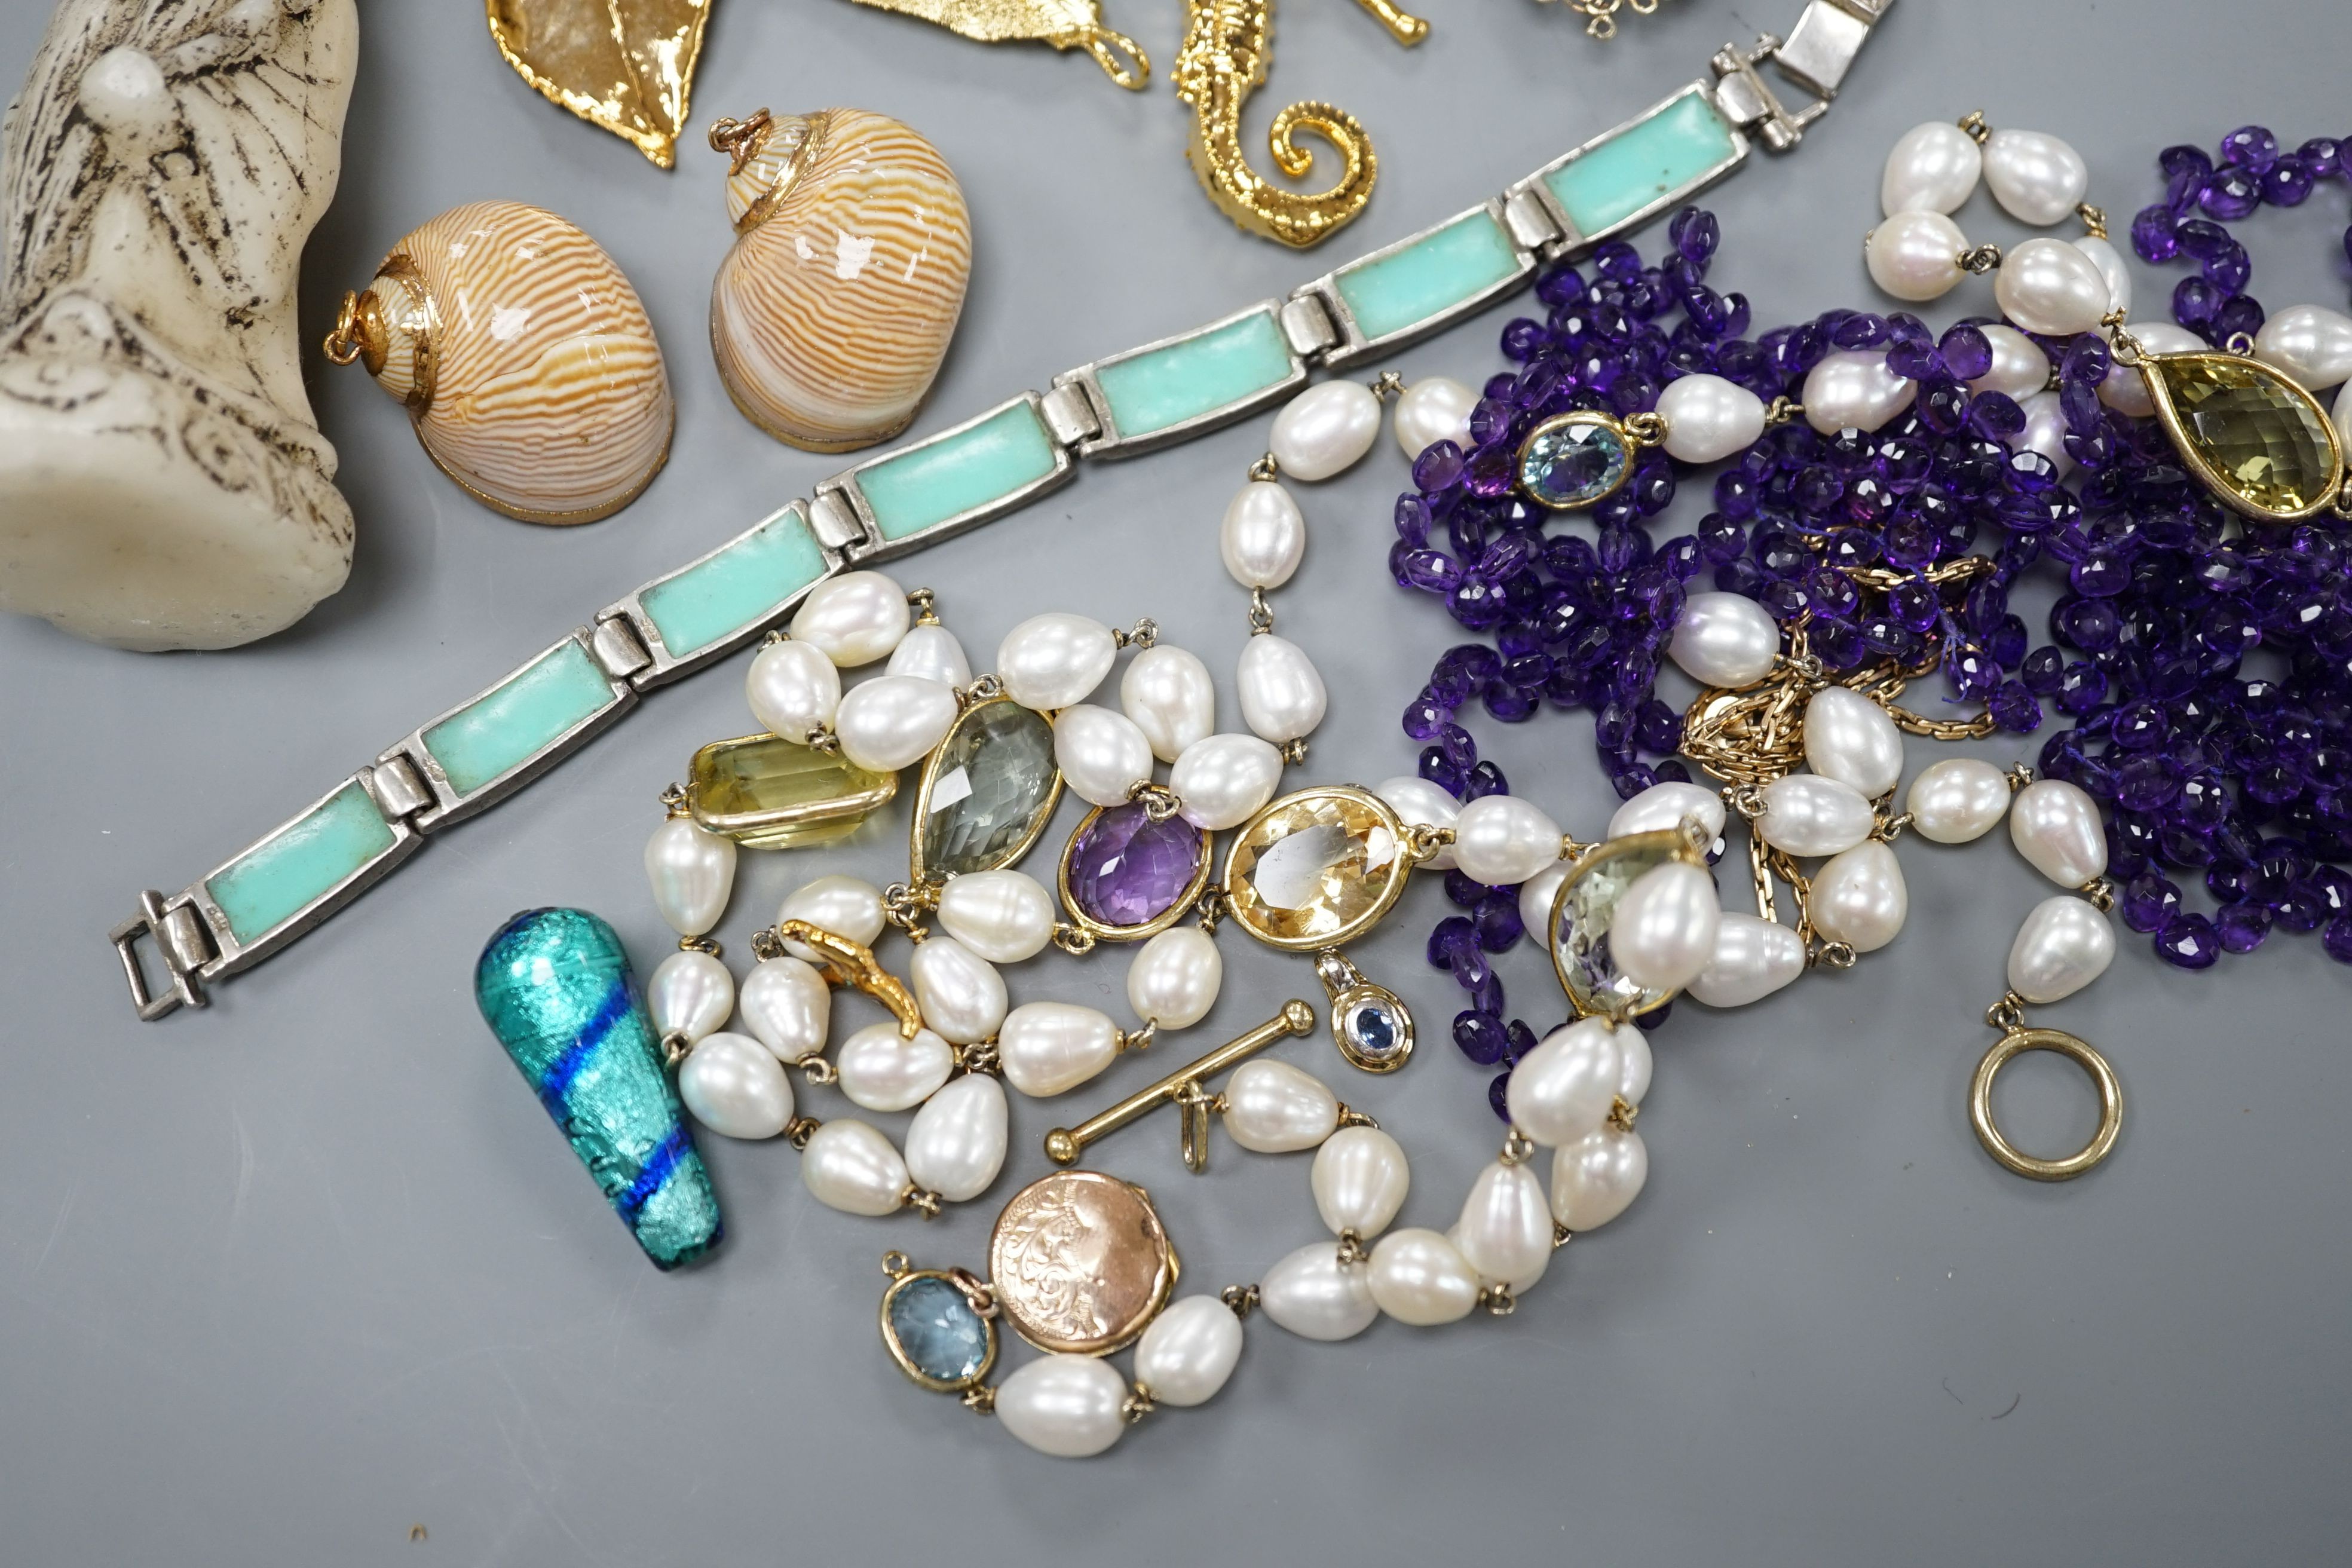 A group of minor costume jewellery including an amethyst bead necklace